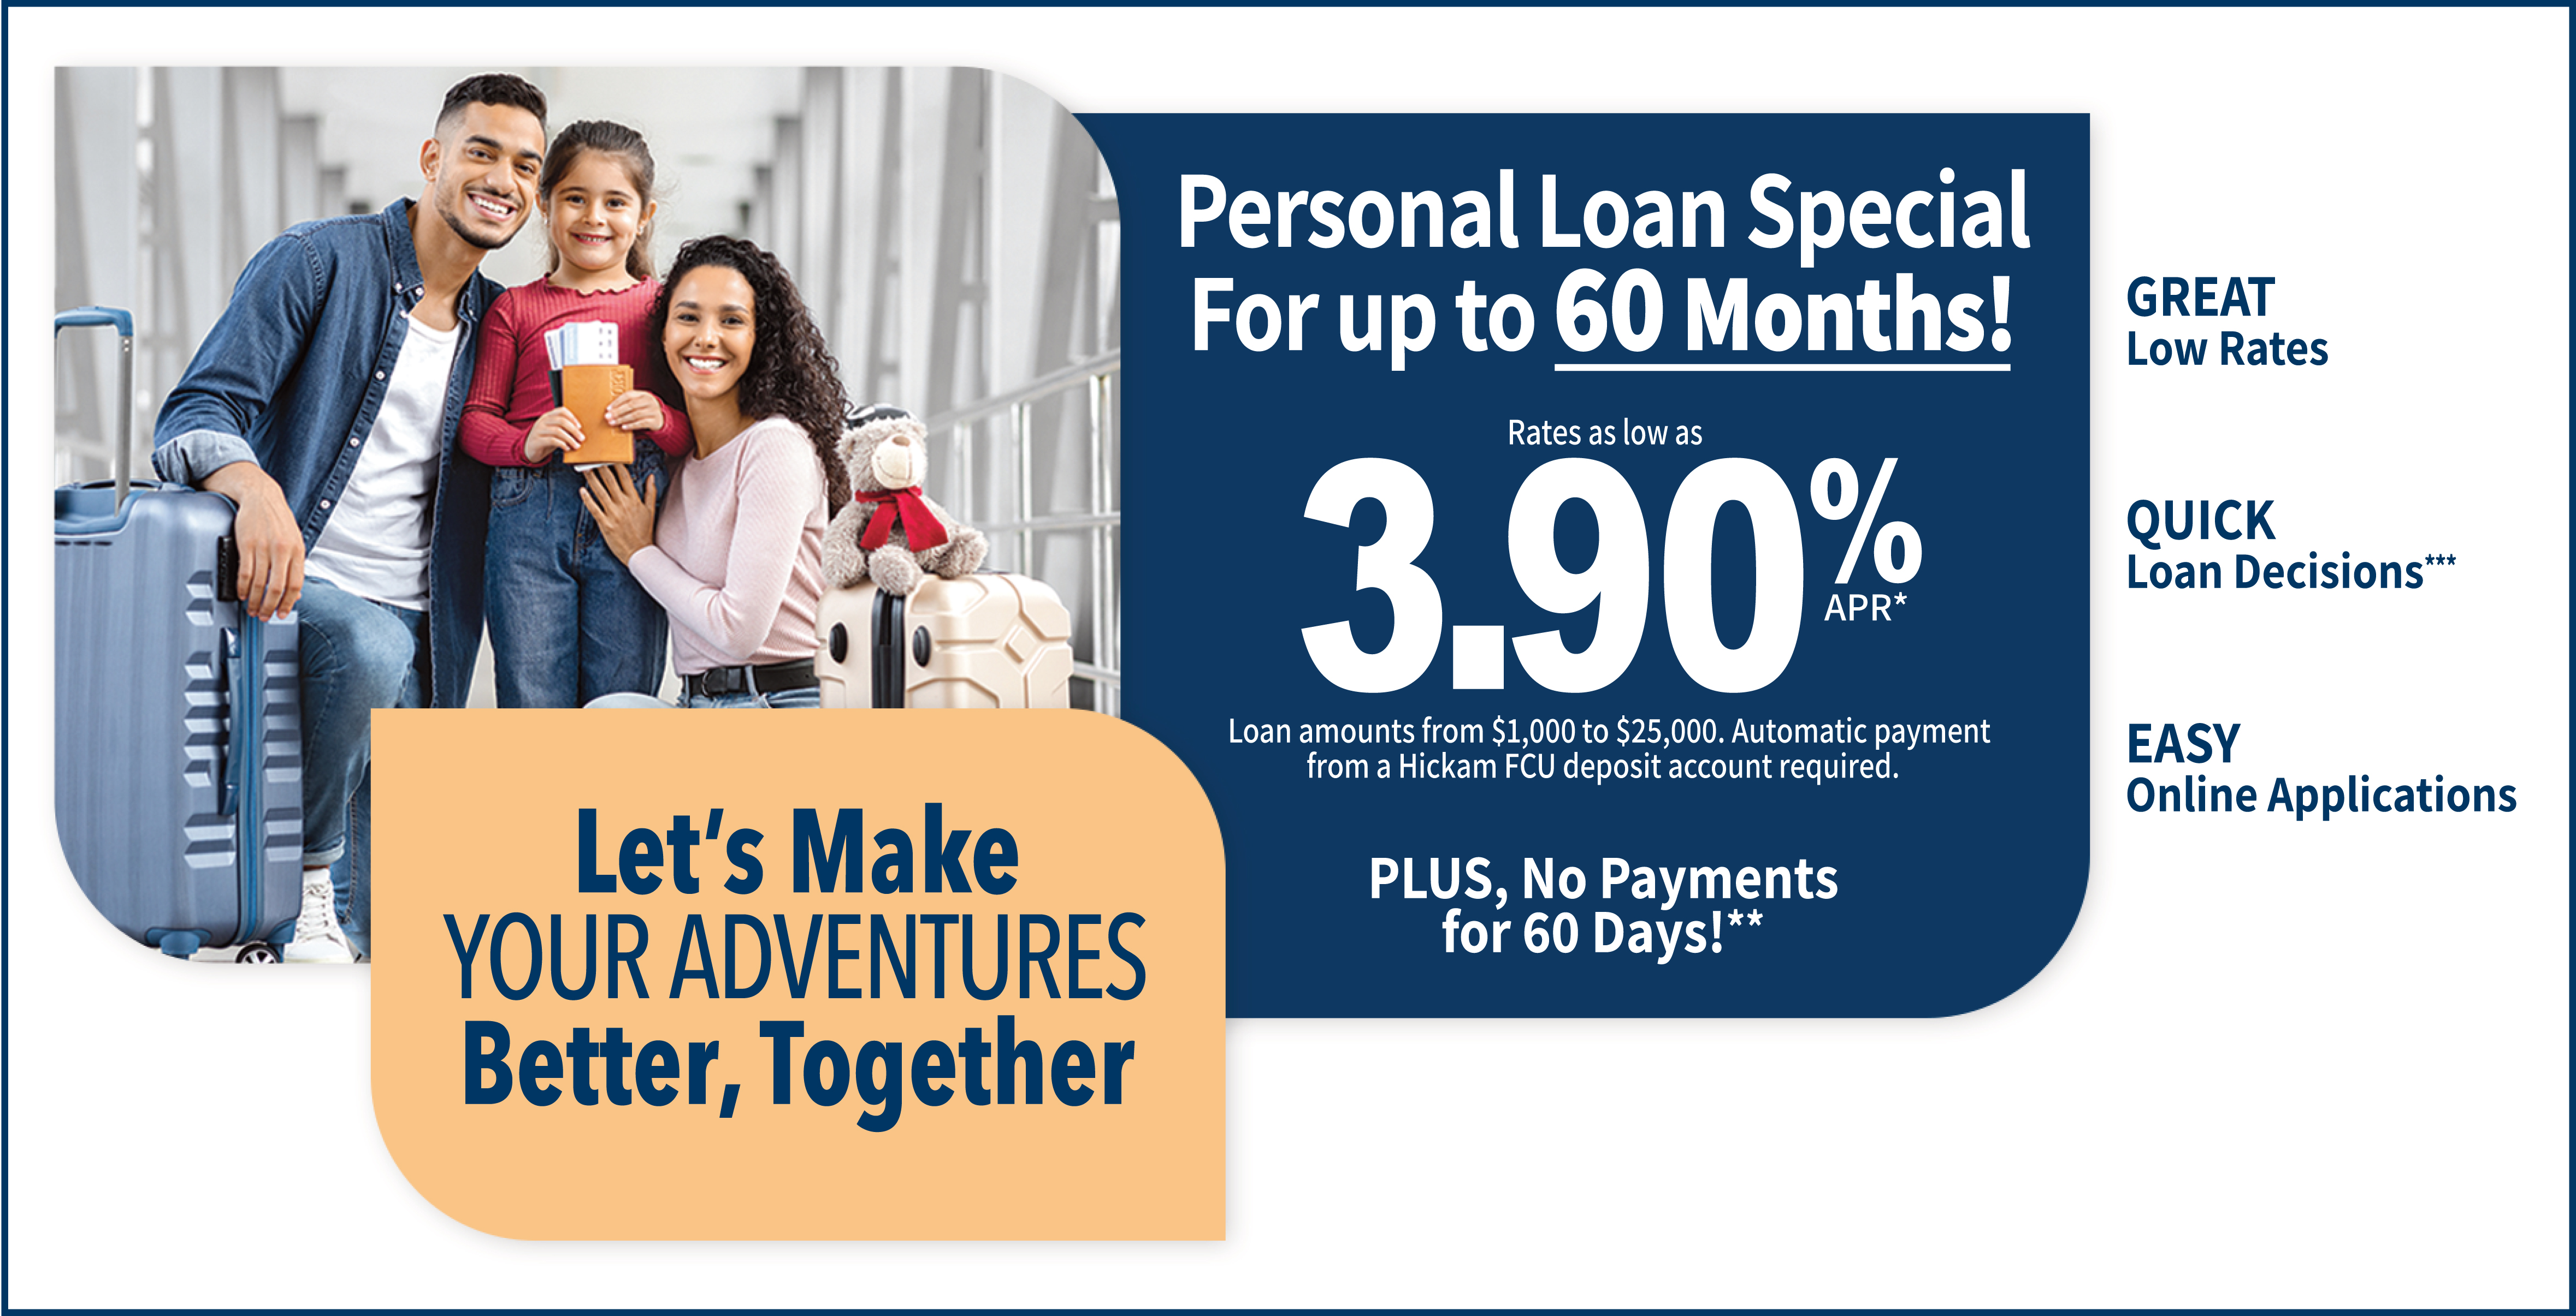 Personal Loan Special with rates as low as 3.90% APR for up to 60-months.